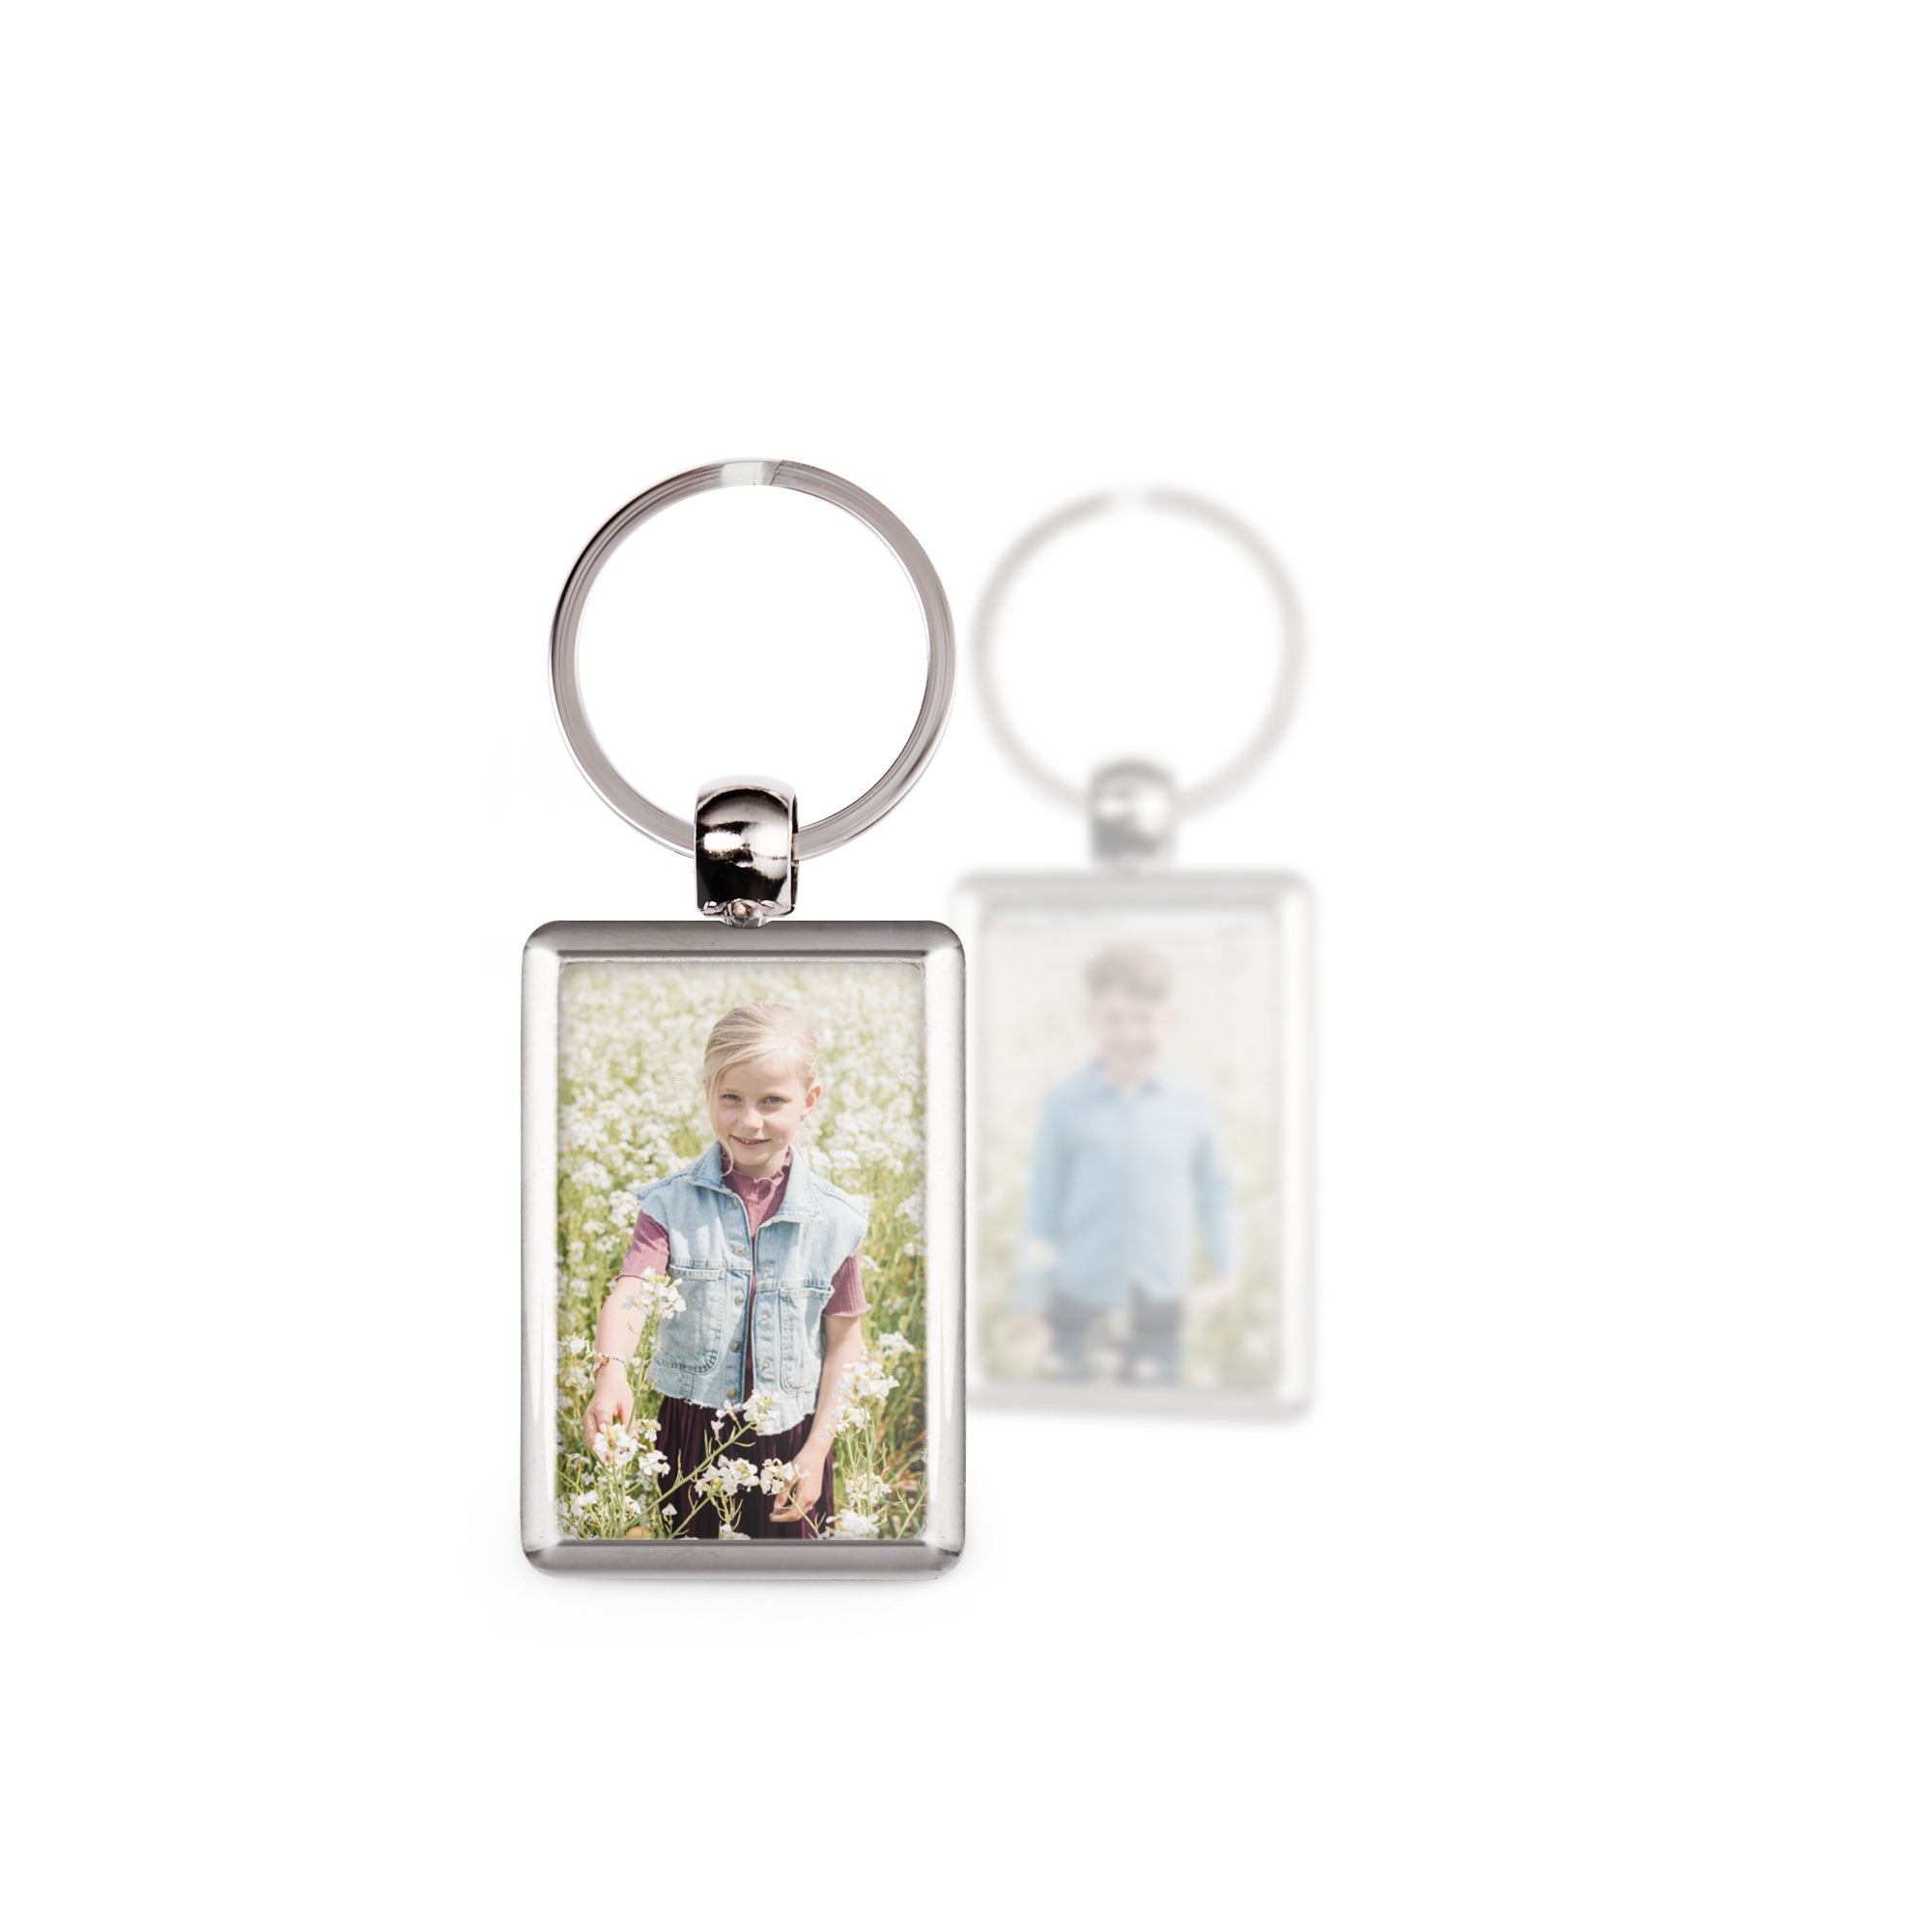 Personalised key ring - Rectangle - Stainless steel - Double-sided